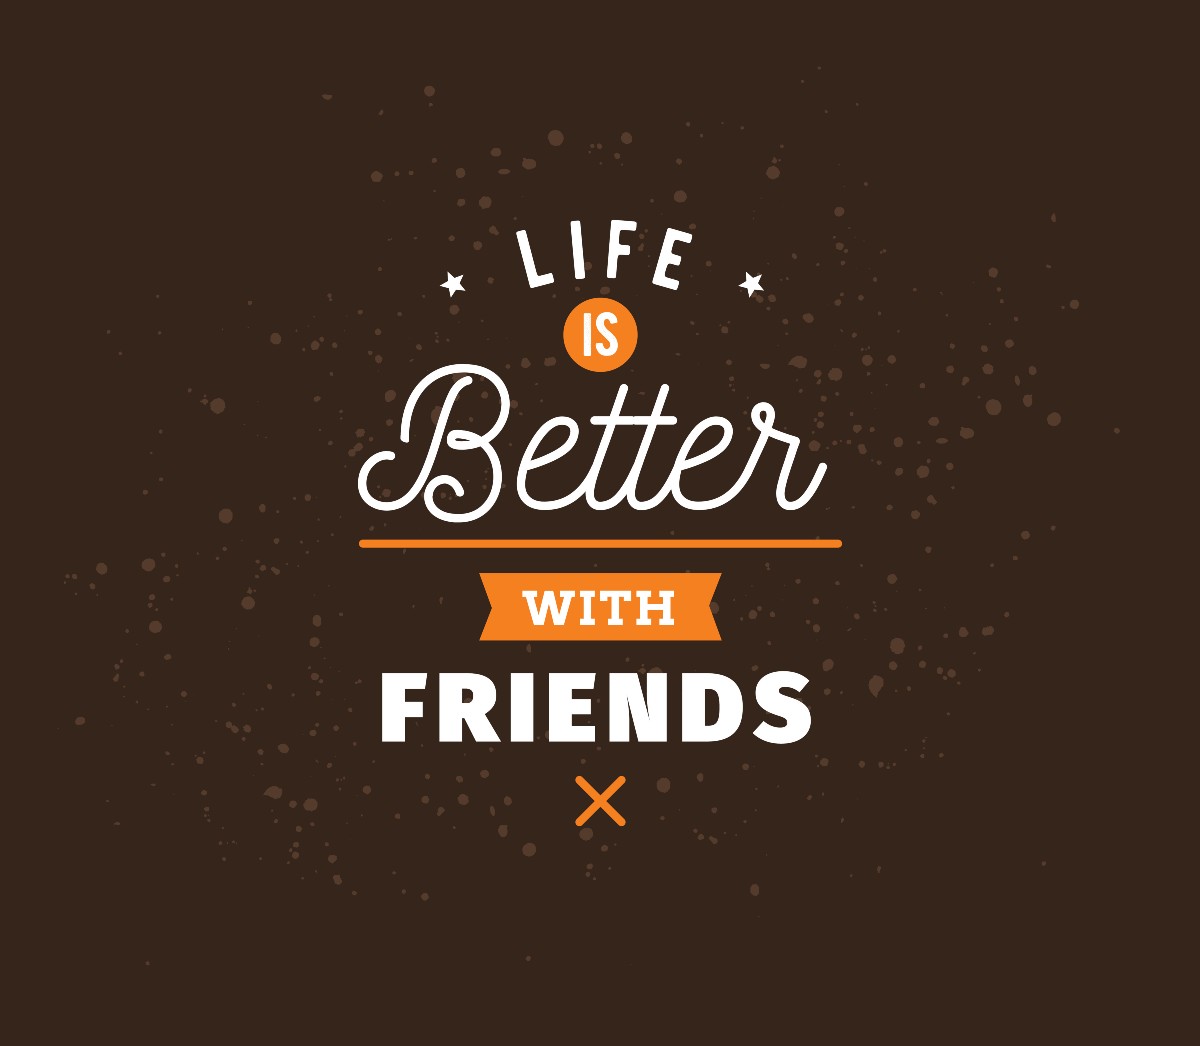 Friendship Day Quotes For Best Friend - Friendship Day 2021: Send these